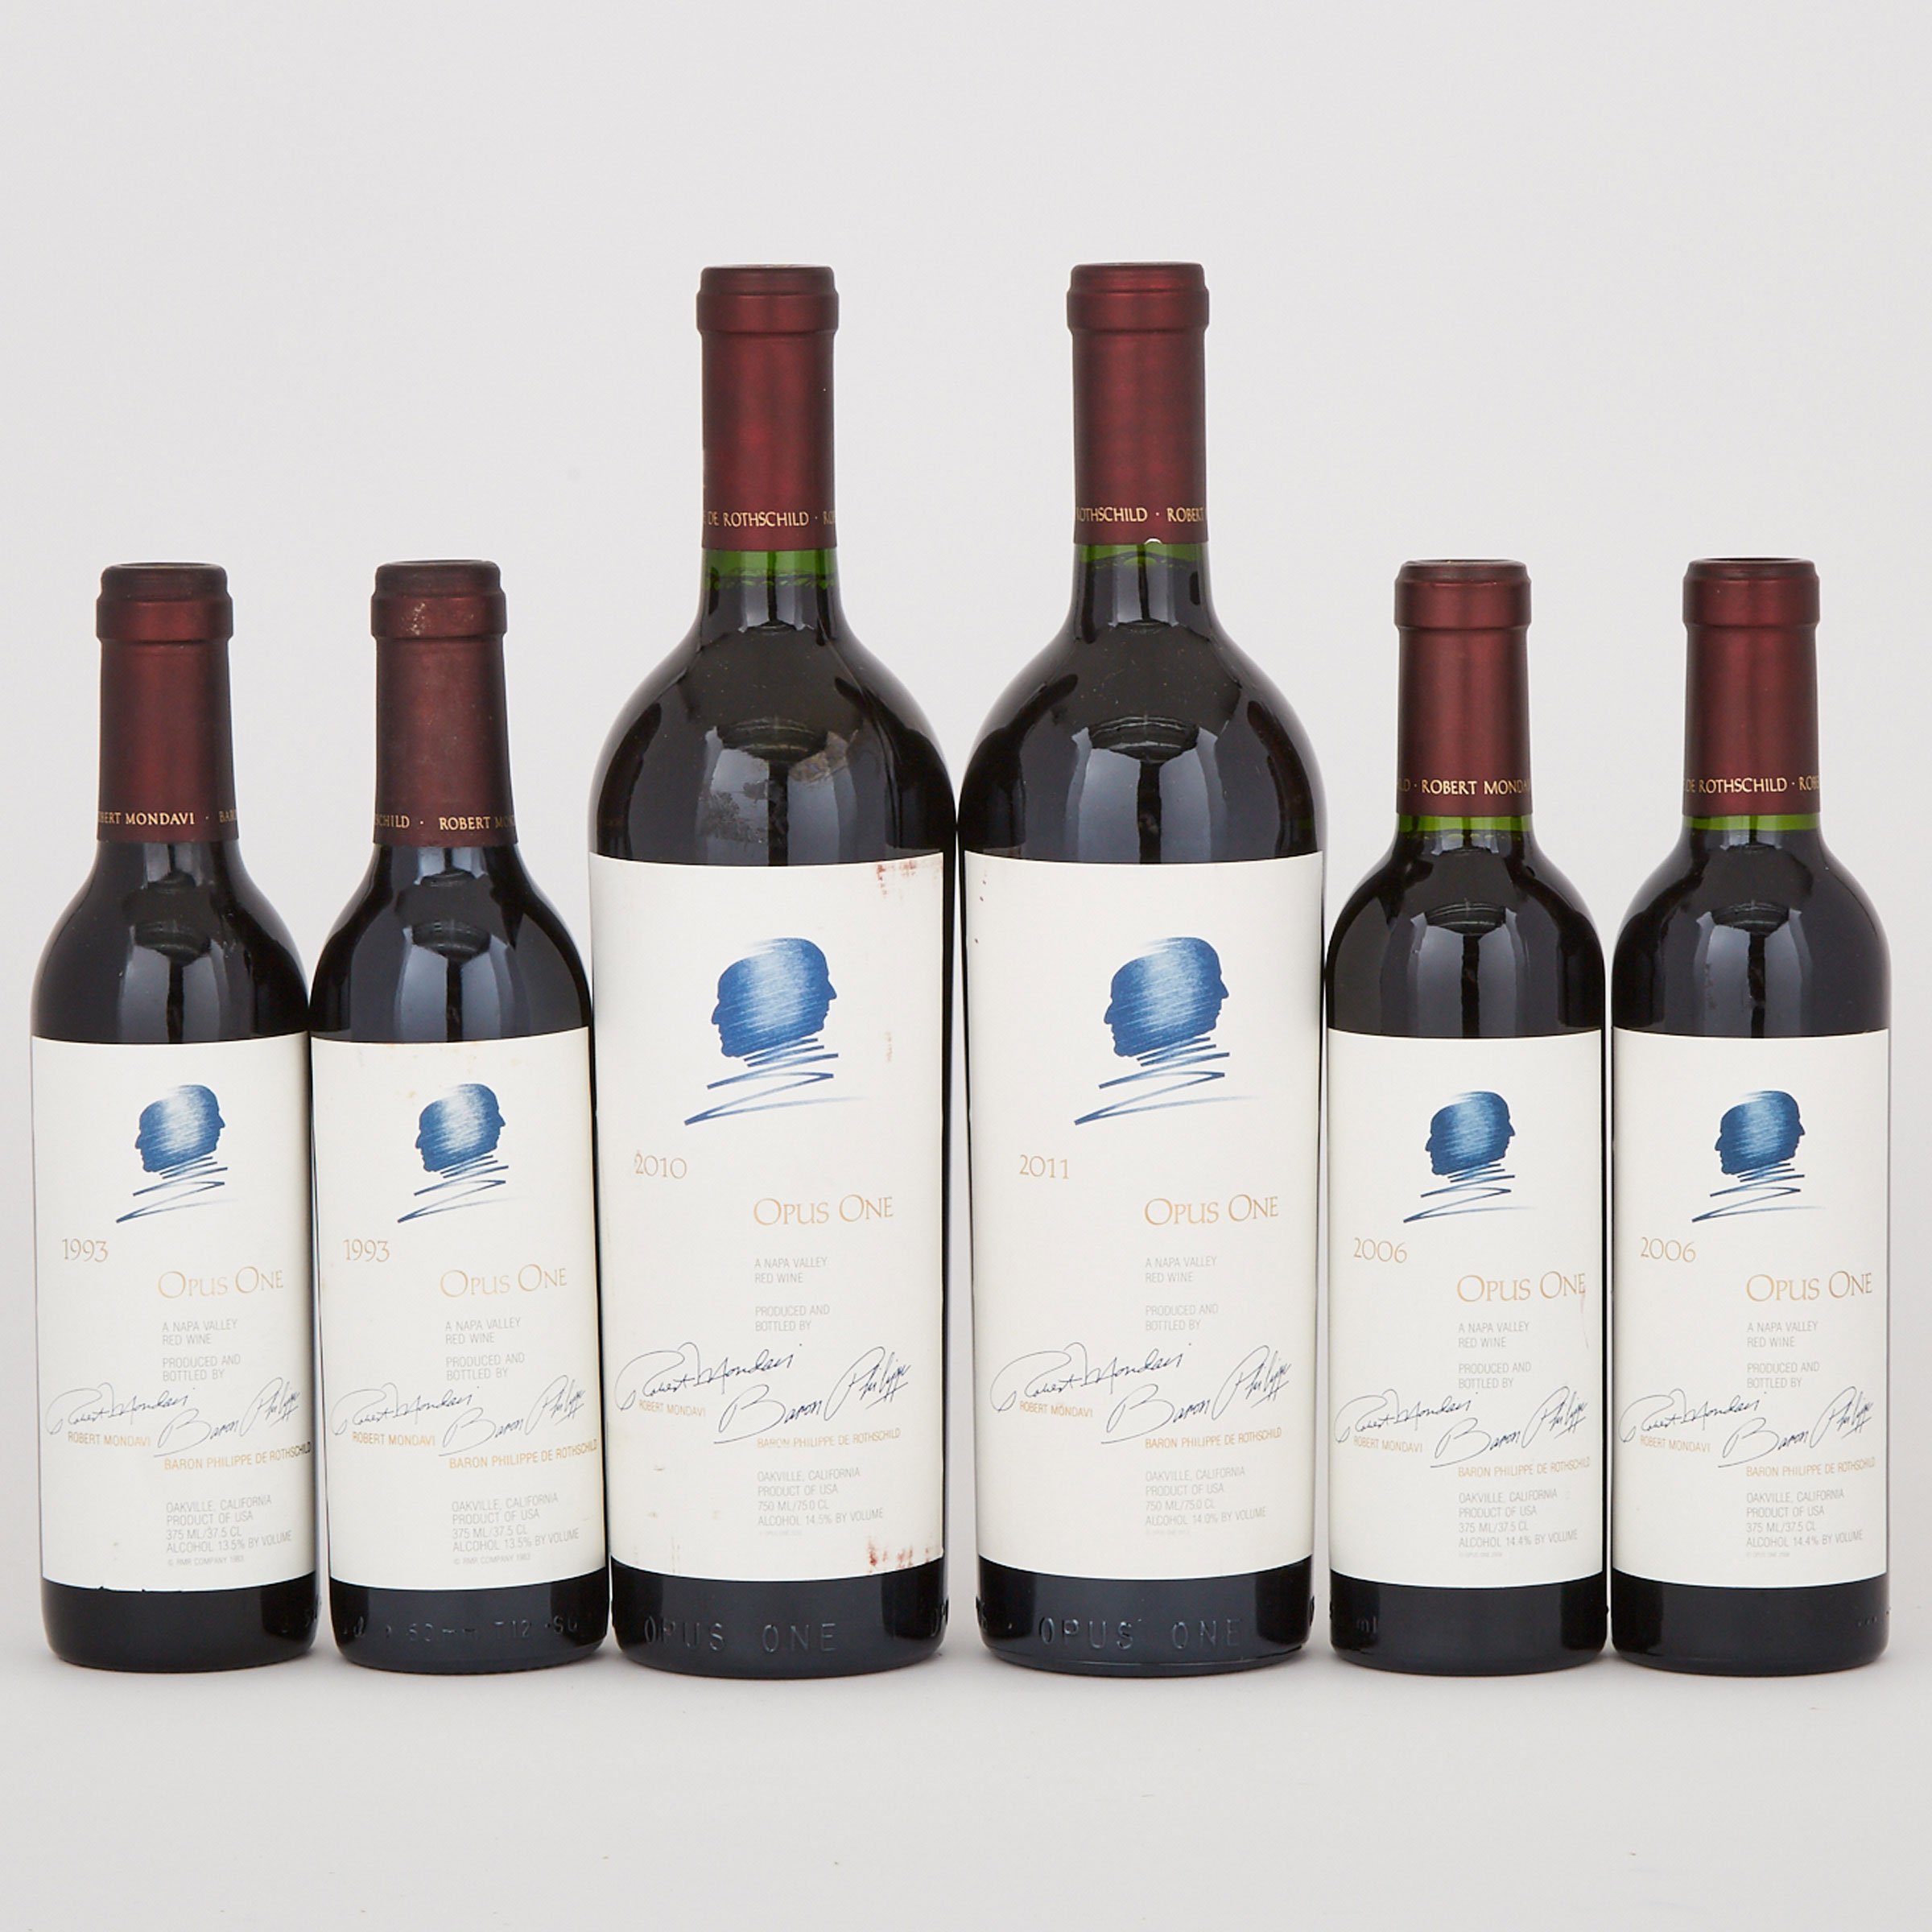 OPUS ONE 1993 (2 HF. BT.)
OPUS ONE 2006 (2 HF. BT.) 93+ WA
OPUS ONE 2010 (1) 96 WA
OPUS ONE 2011 (1)